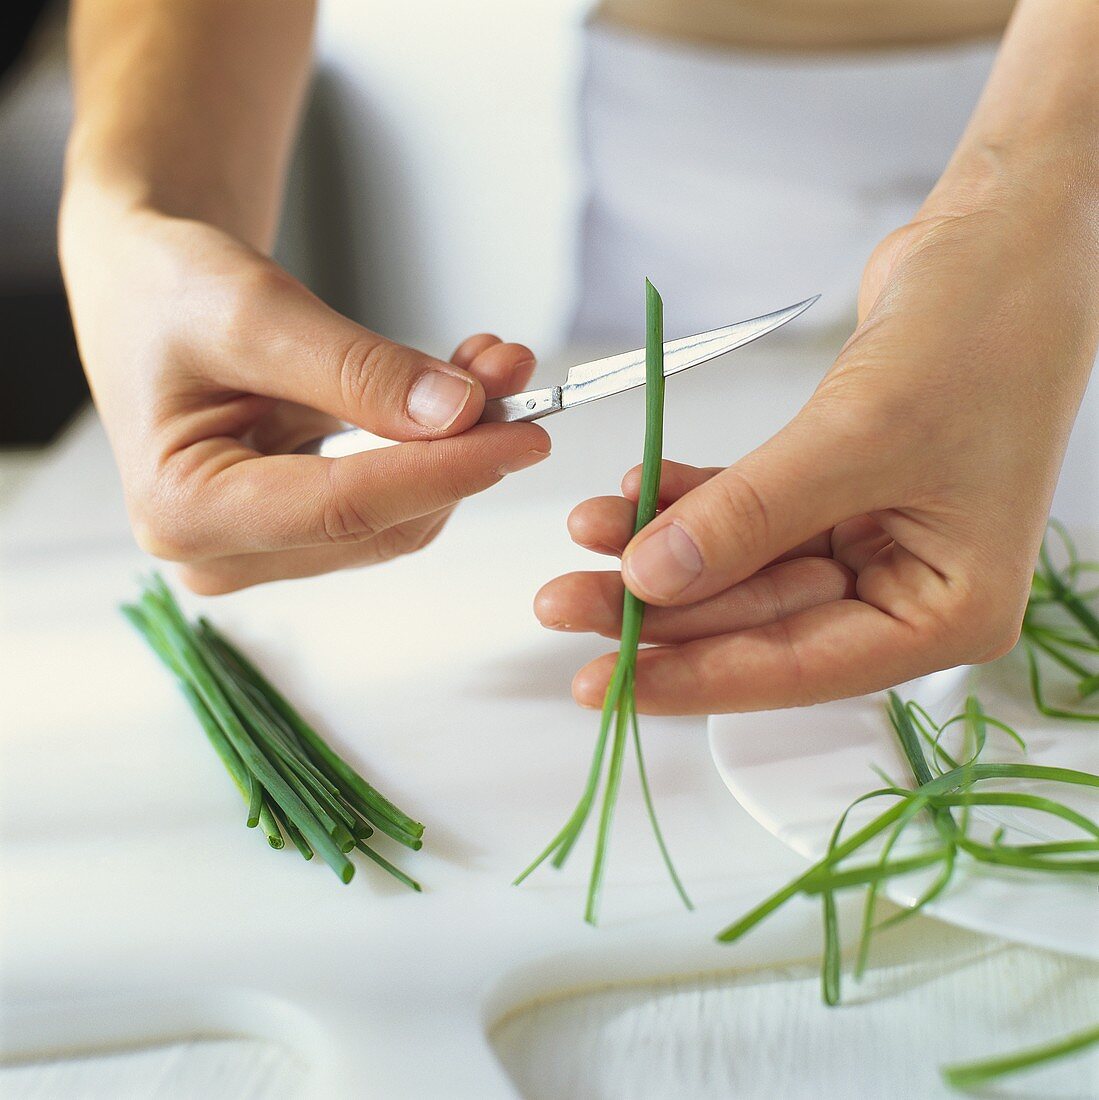 Cutting into chive stalk